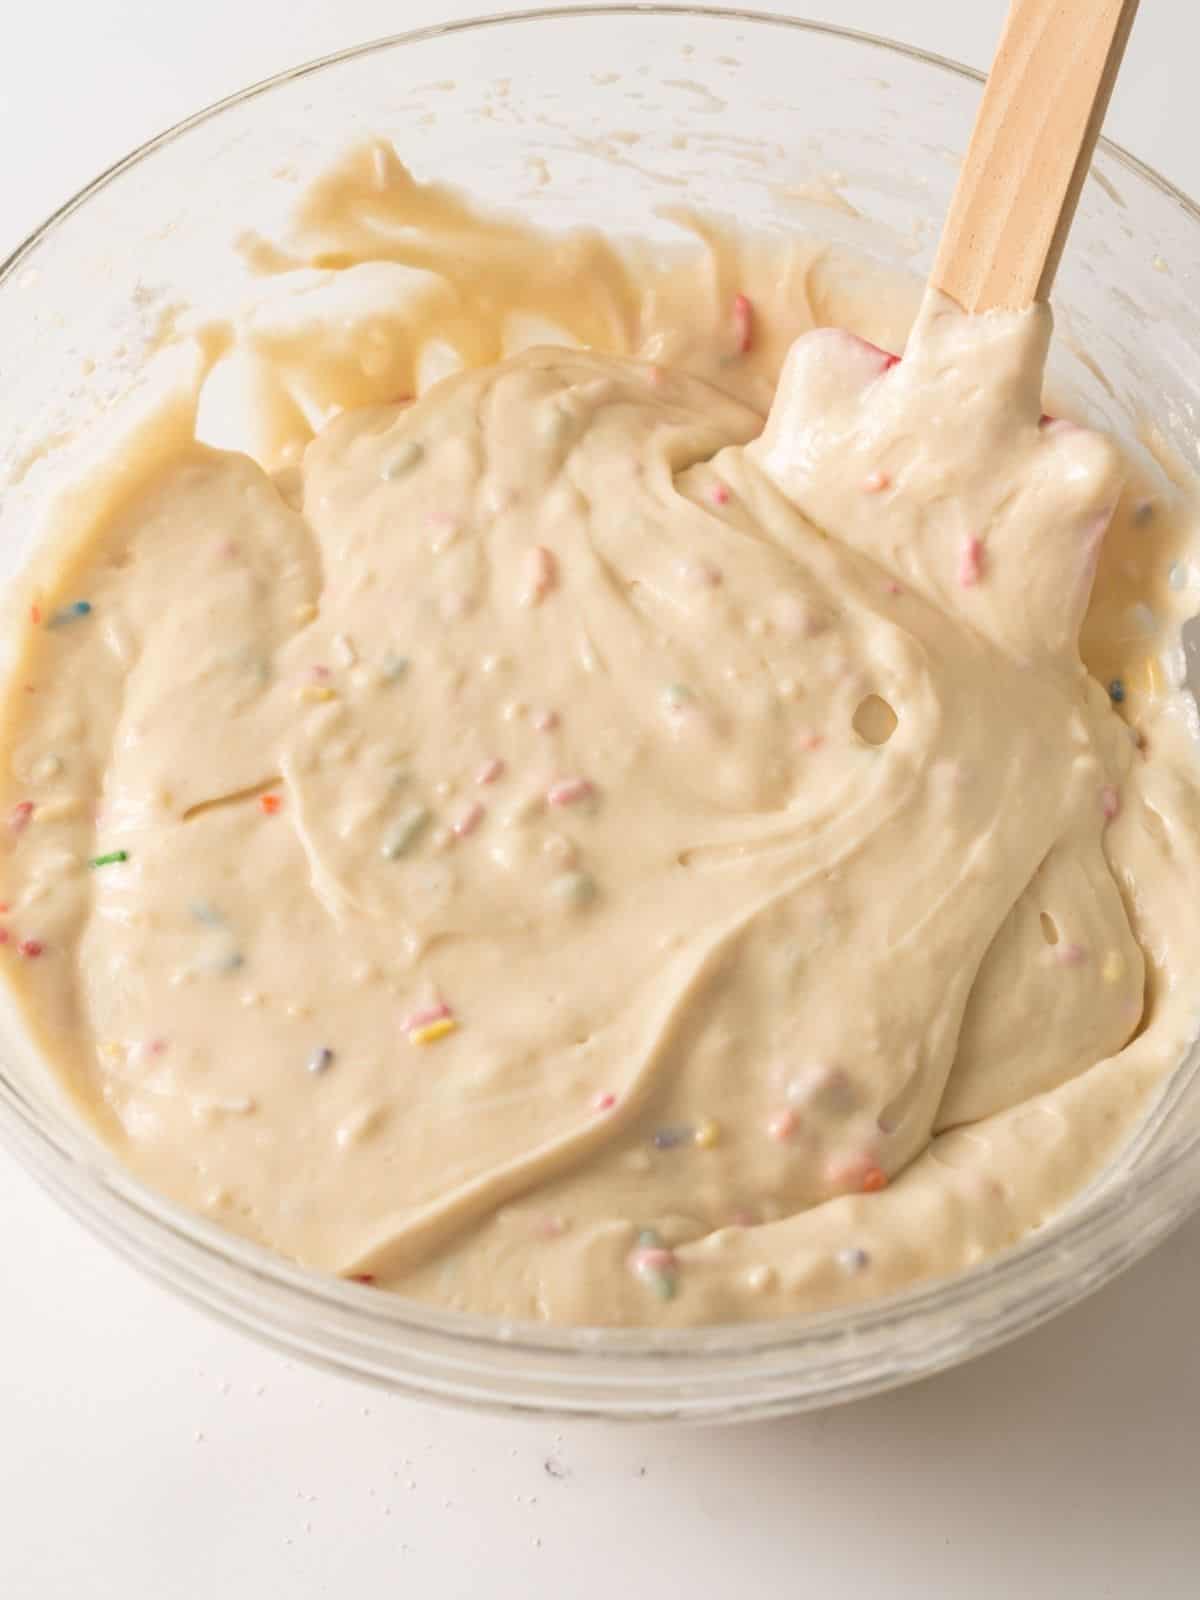 homemade muffin batter in bowl with rainbow sprinkles.